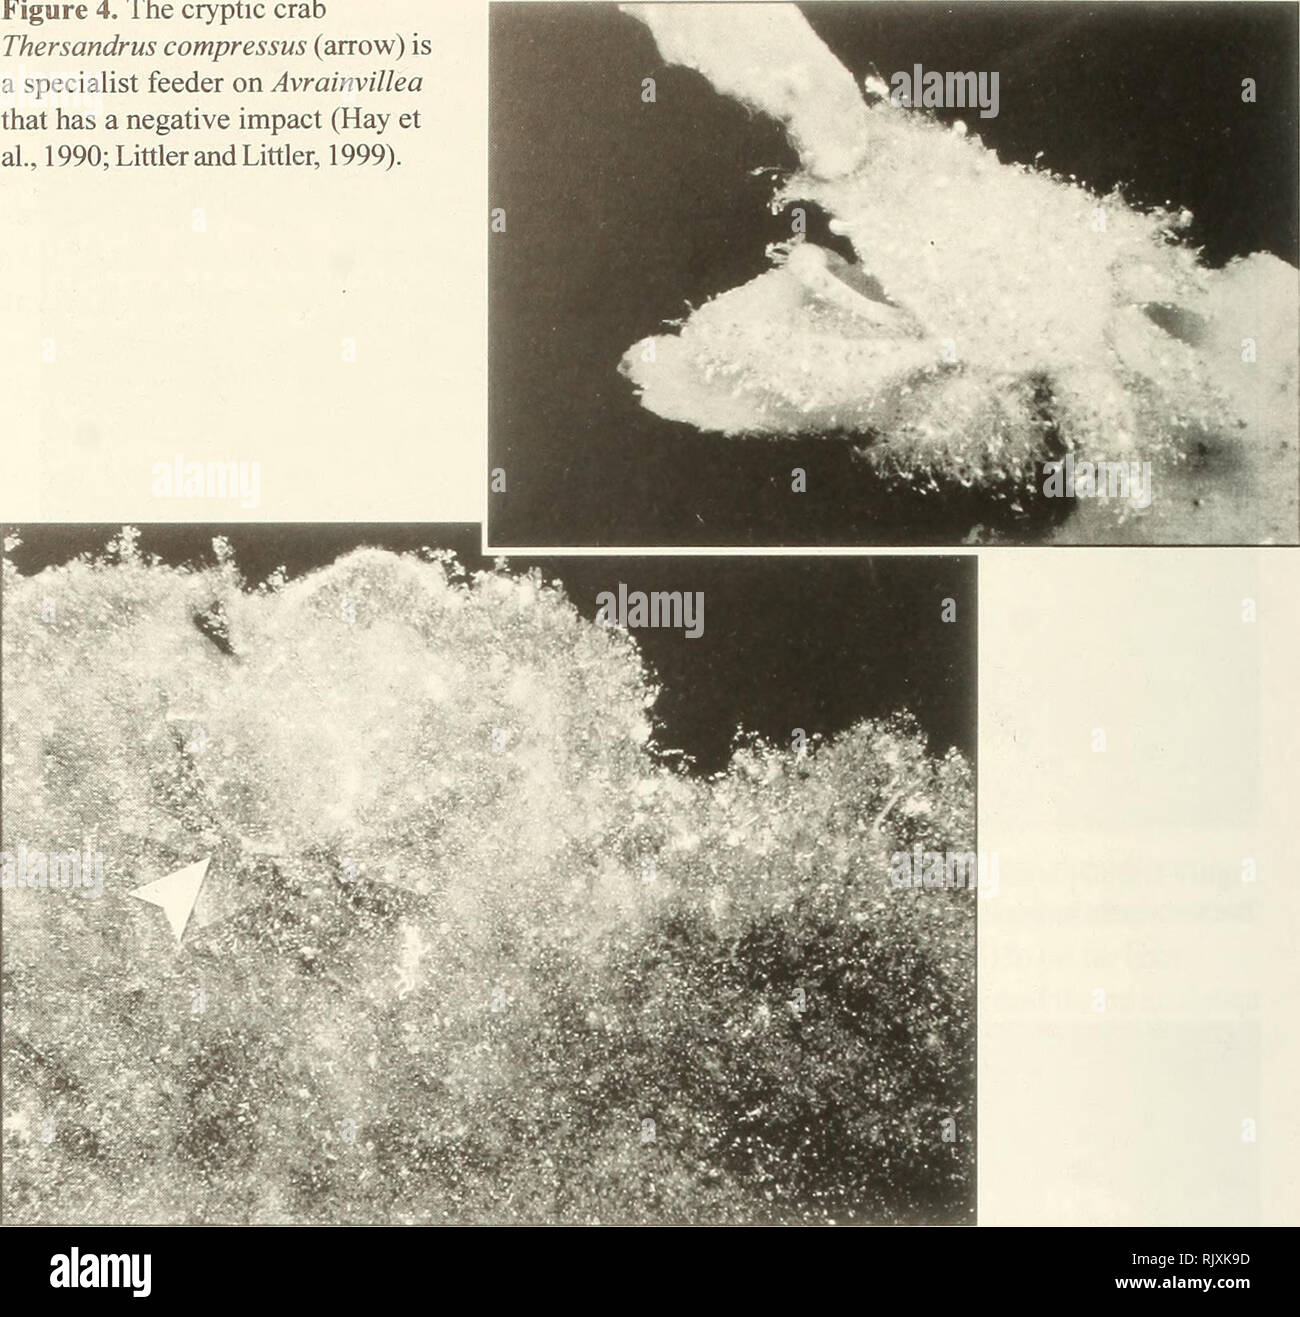 . Atoll research bulletin. Coral reefs and islands; Marine biology; Marine sciences. Figure 4. The cryptic crab Thersandrus compressus (arrow) is a specialist feeder on Avrainvillea that has a negative impact (Hay et al., 1990; Littler and Littler, 1999).. Hay and Fenical, 1988) and highly specialized interactions between the larger forms (e.g., Udotea, Avrainvillea, Caulerpa, Penicillus) and such herbivorous invertebrates as crabs and molluscs have been observed (Hay etal., 1990; Littler and Littler, 1999). Avrainvillea provides microhabitats (Fig. 3), as well as food and shelter (Fig. 4), fo Stock Photo